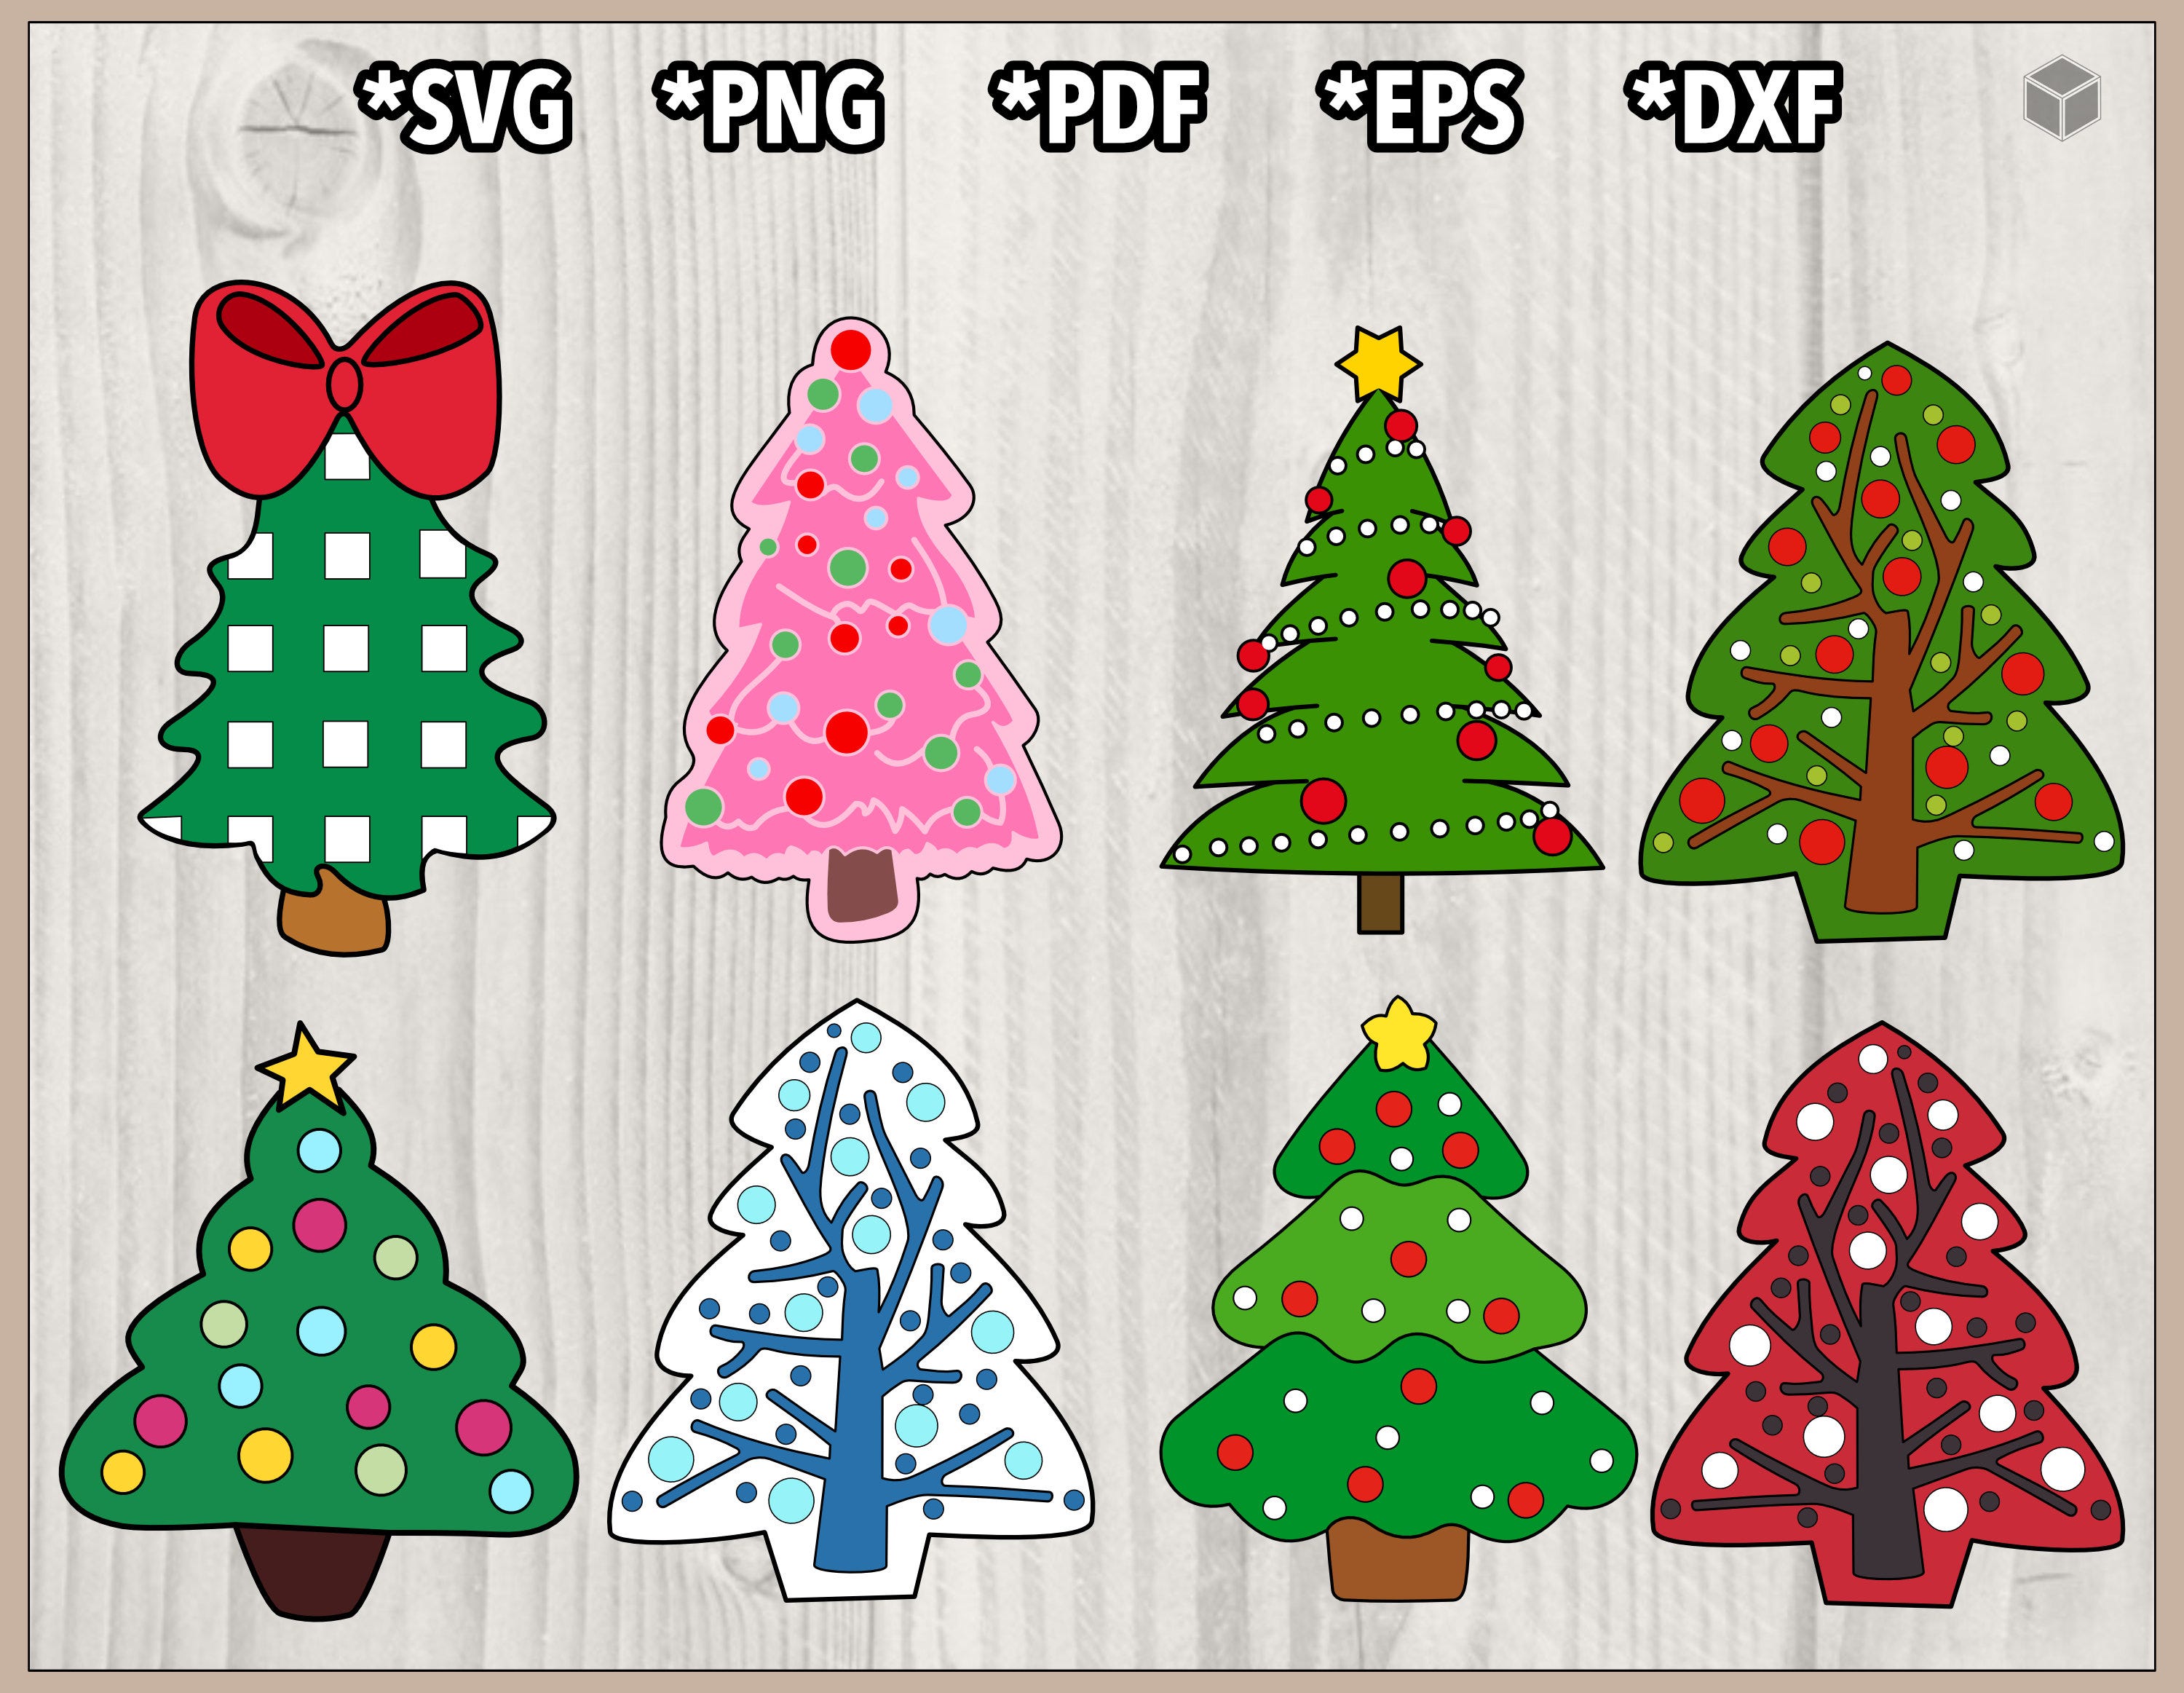 Christmas Tree SVG Bundle, Holiday Decorated Pine Tree, Festive Foliage Graphic Designs, Santa-Claus Ornaments svg, png, pdf, dxf, eps